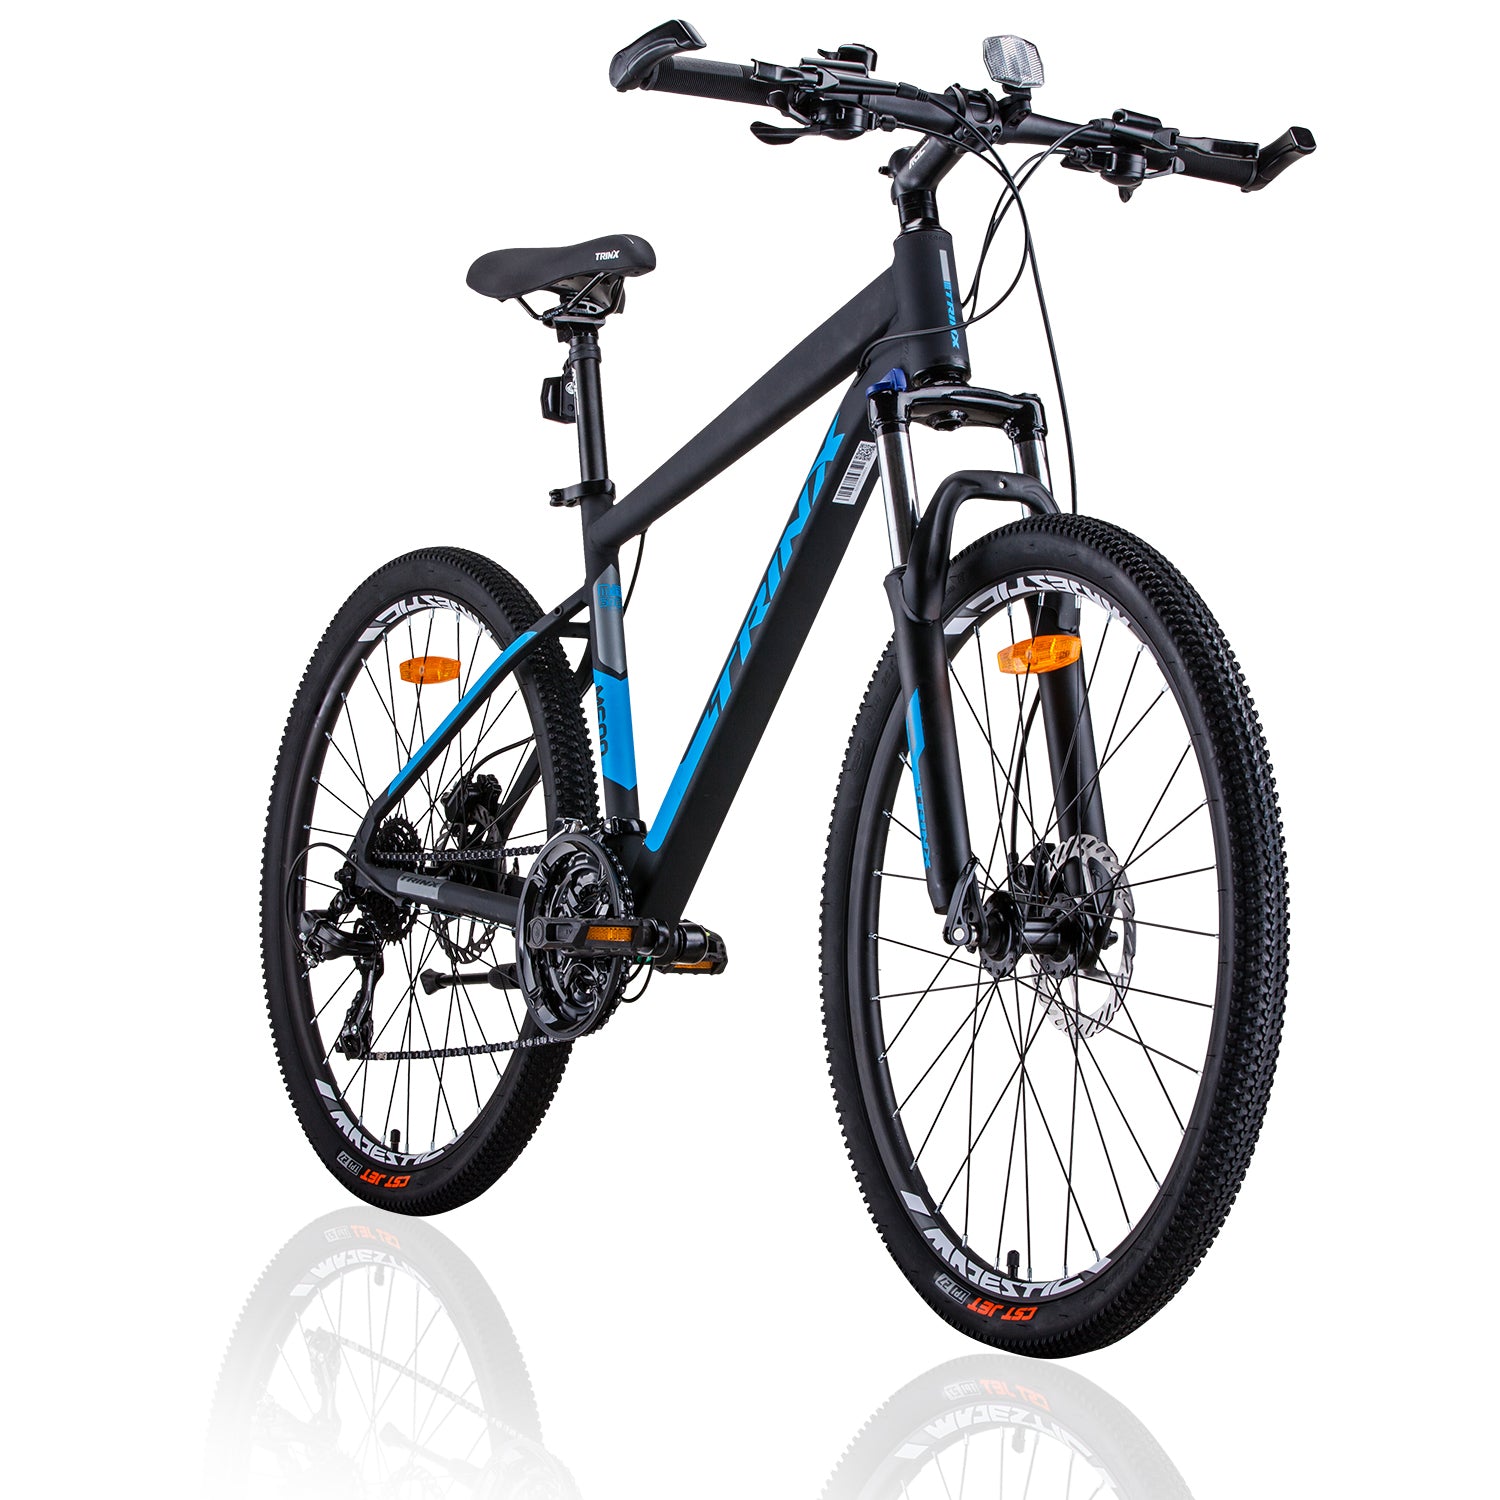 Trinx M600 Mountain Bike 24 Speed MTB Bicycle 17 Inches Frame Blue